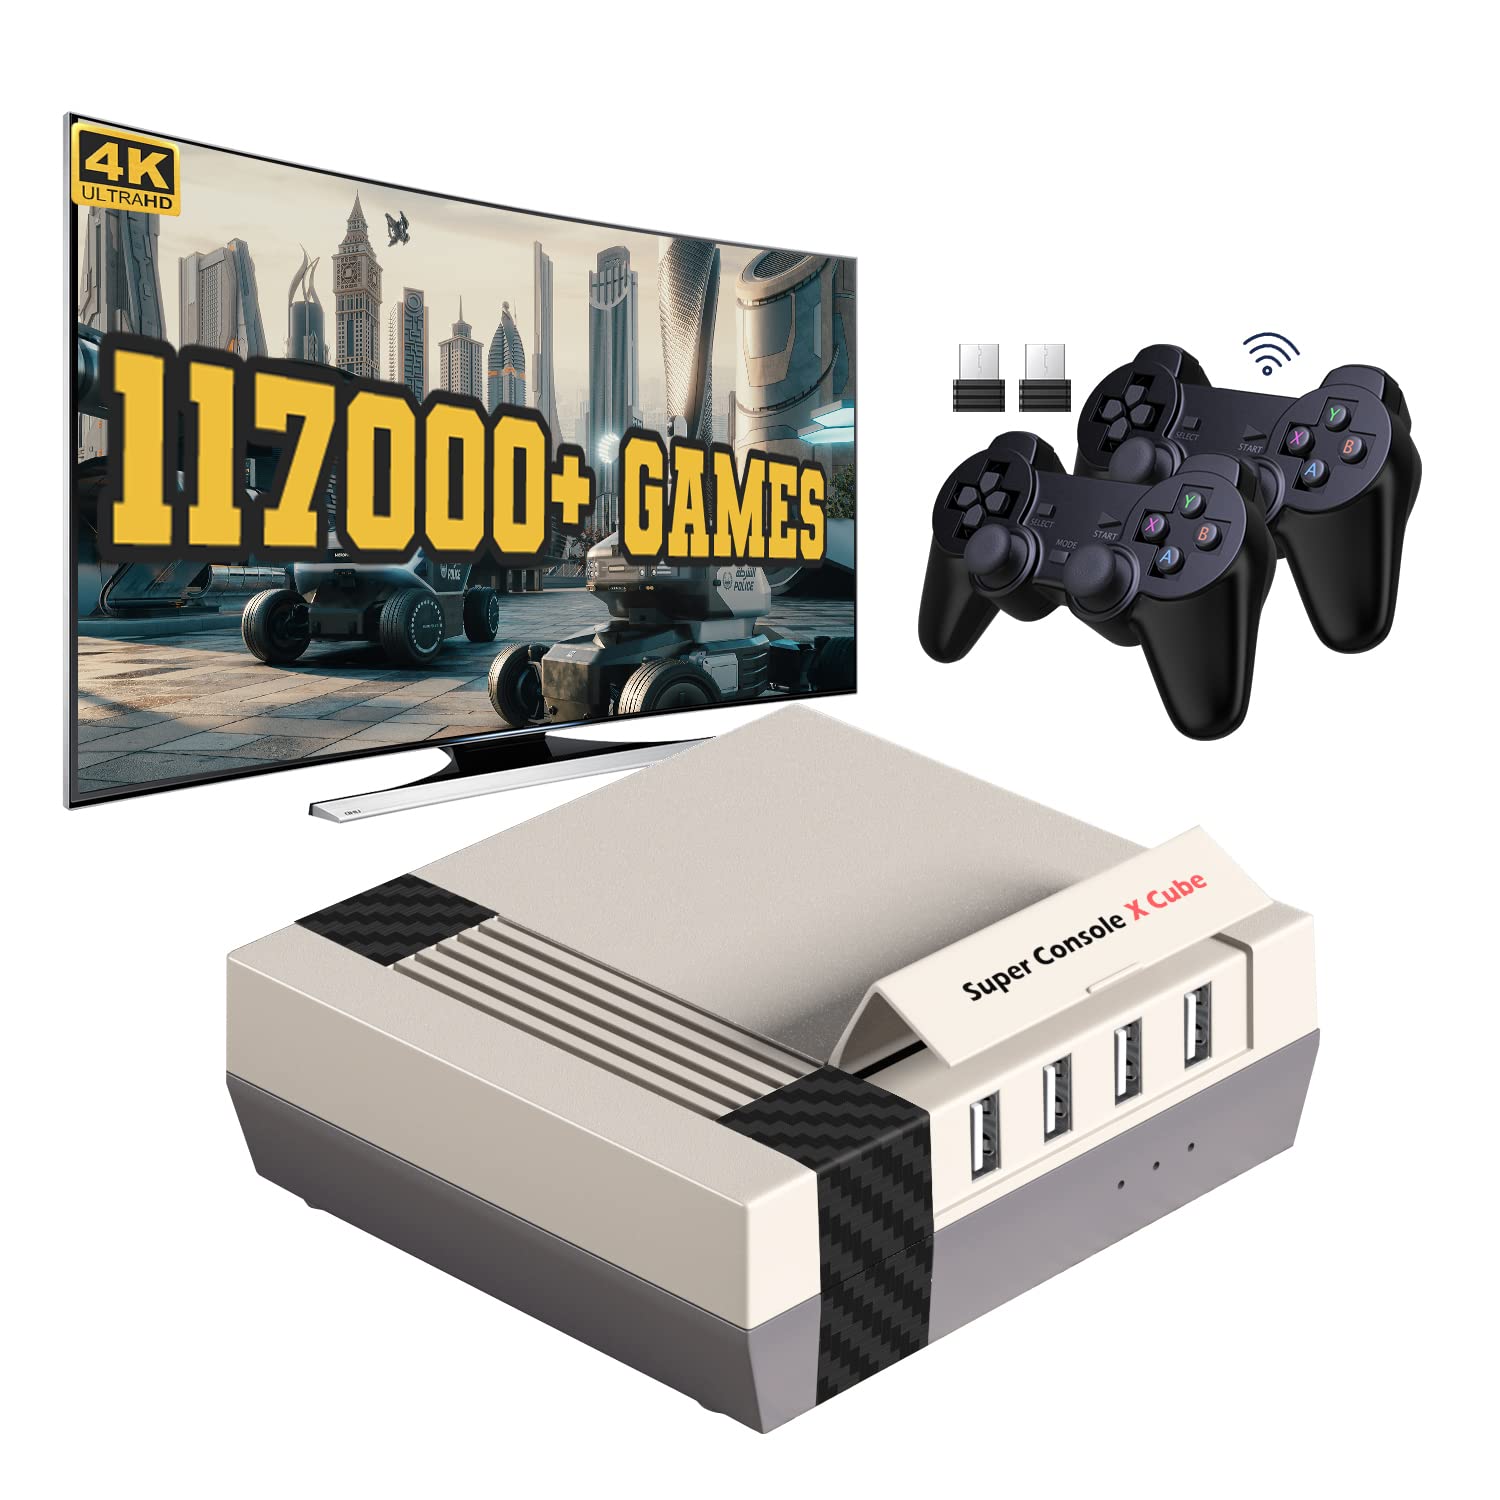 UMSOO Super Console X Cube Retro Game Console Support 117000 Video Games 70 Emulators for NAOMI/DC/MAME with Gamepads